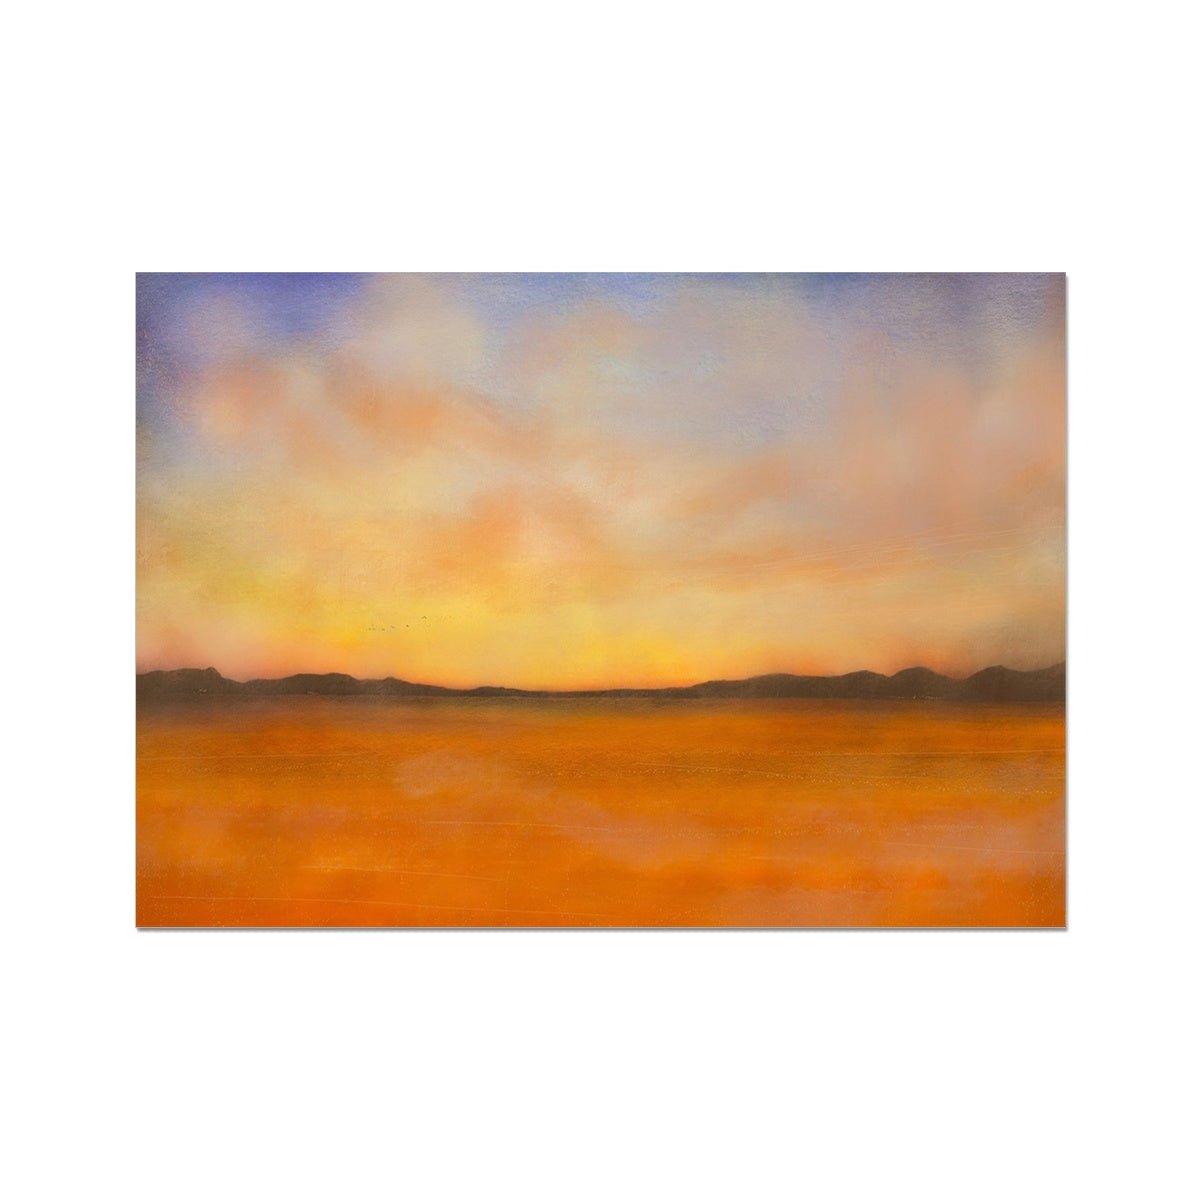 Islay Dawn Painting | Fine Art Prints From Scotland-Unframed Prints-Hebridean Islands Art Gallery-A2 Landscape-Paintings, Prints, Homeware, Art Gifts From Scotland By Scottish Artist Kevin Hunter